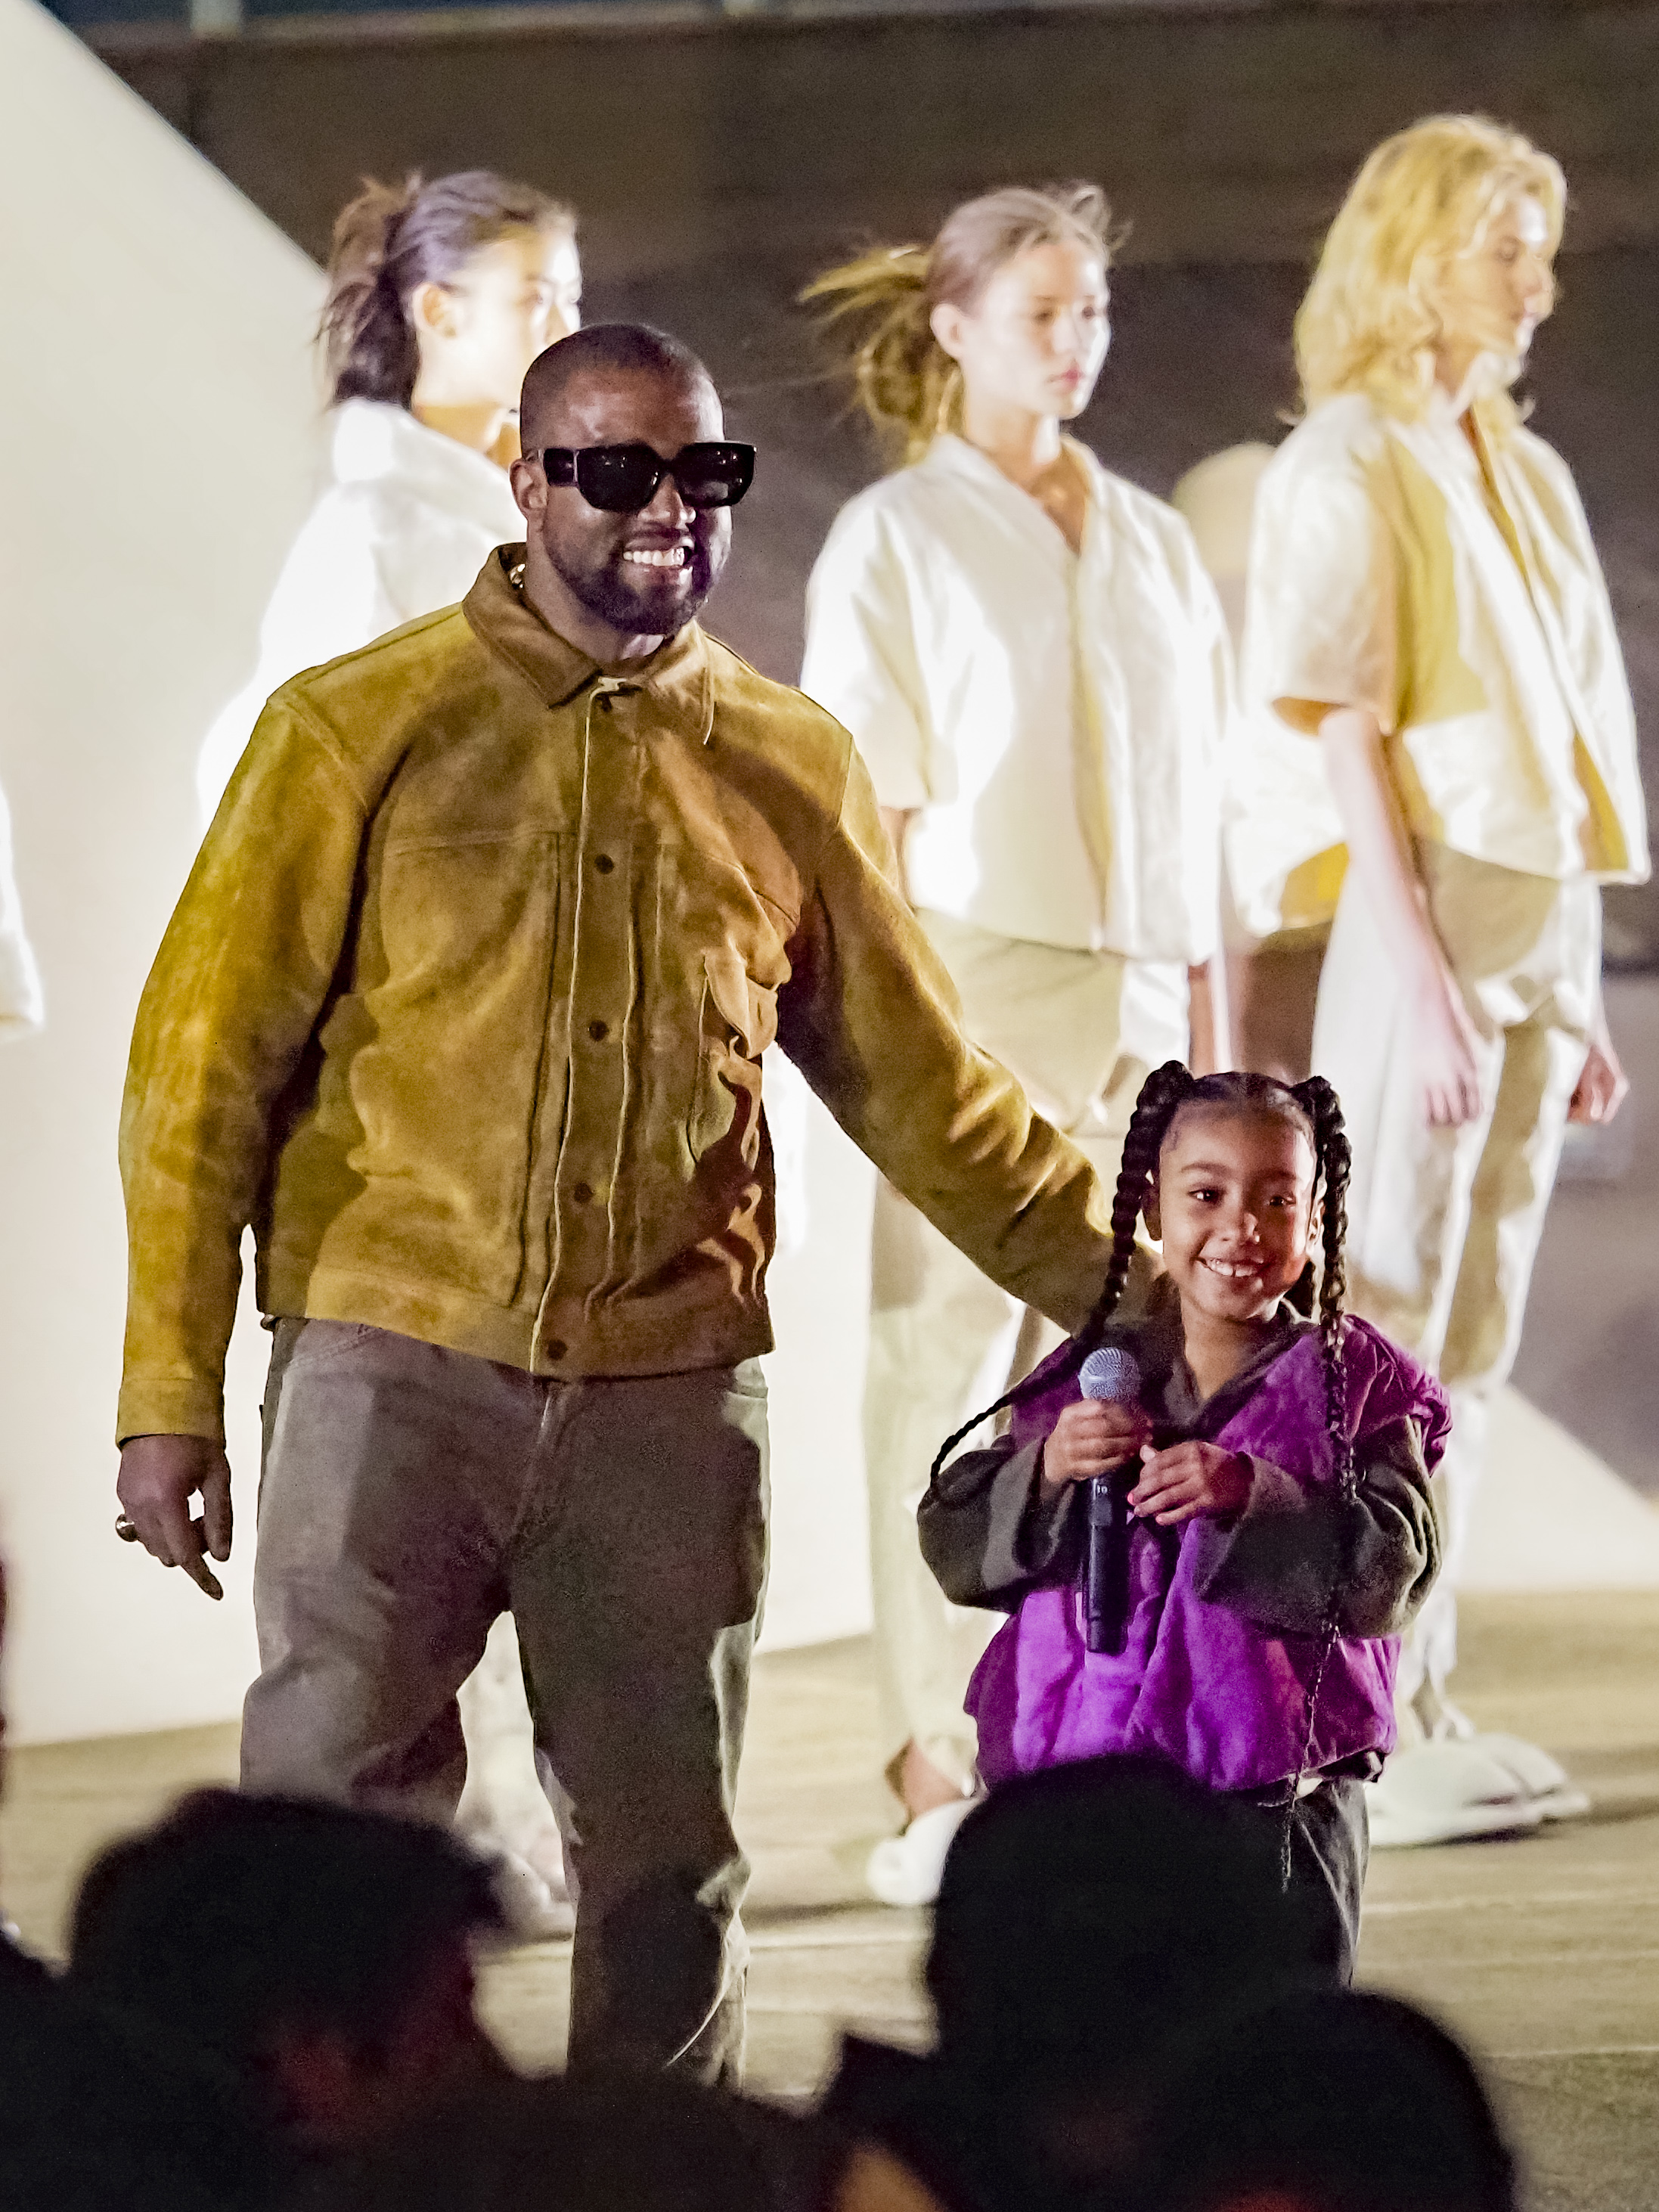 Kanye posed with his daughter North West at an event in March 2020